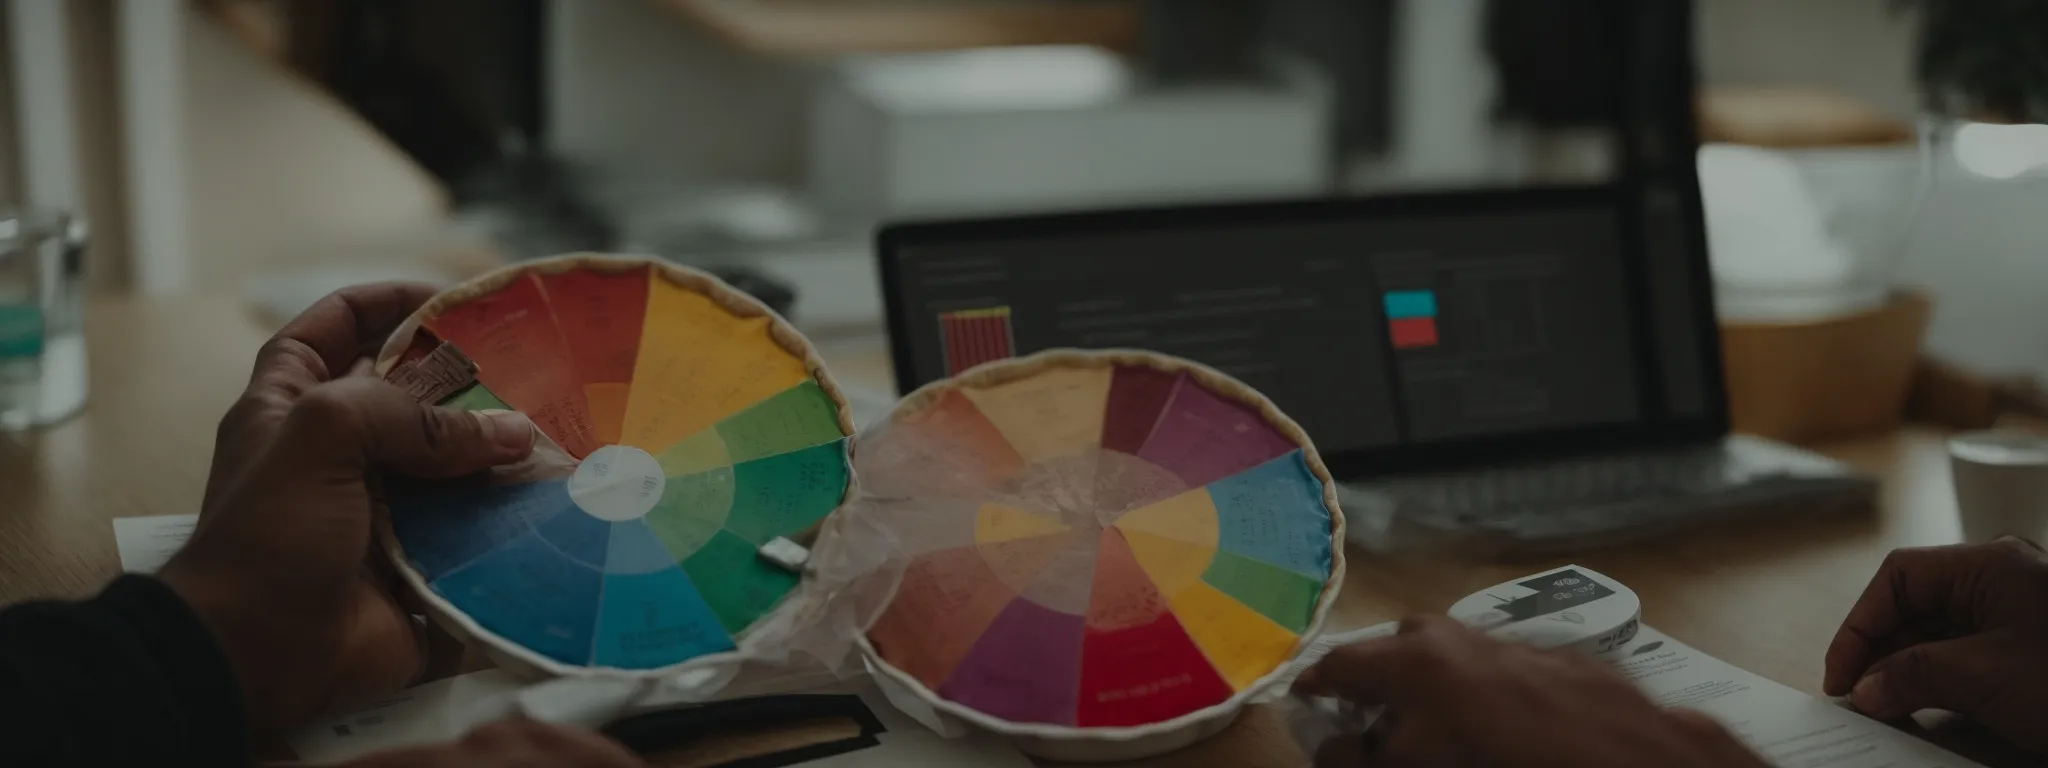 a marketing professional meticulously adjusts a colorful pie chart, symbolizing the segmentation of an audience for targeted communication strategies.